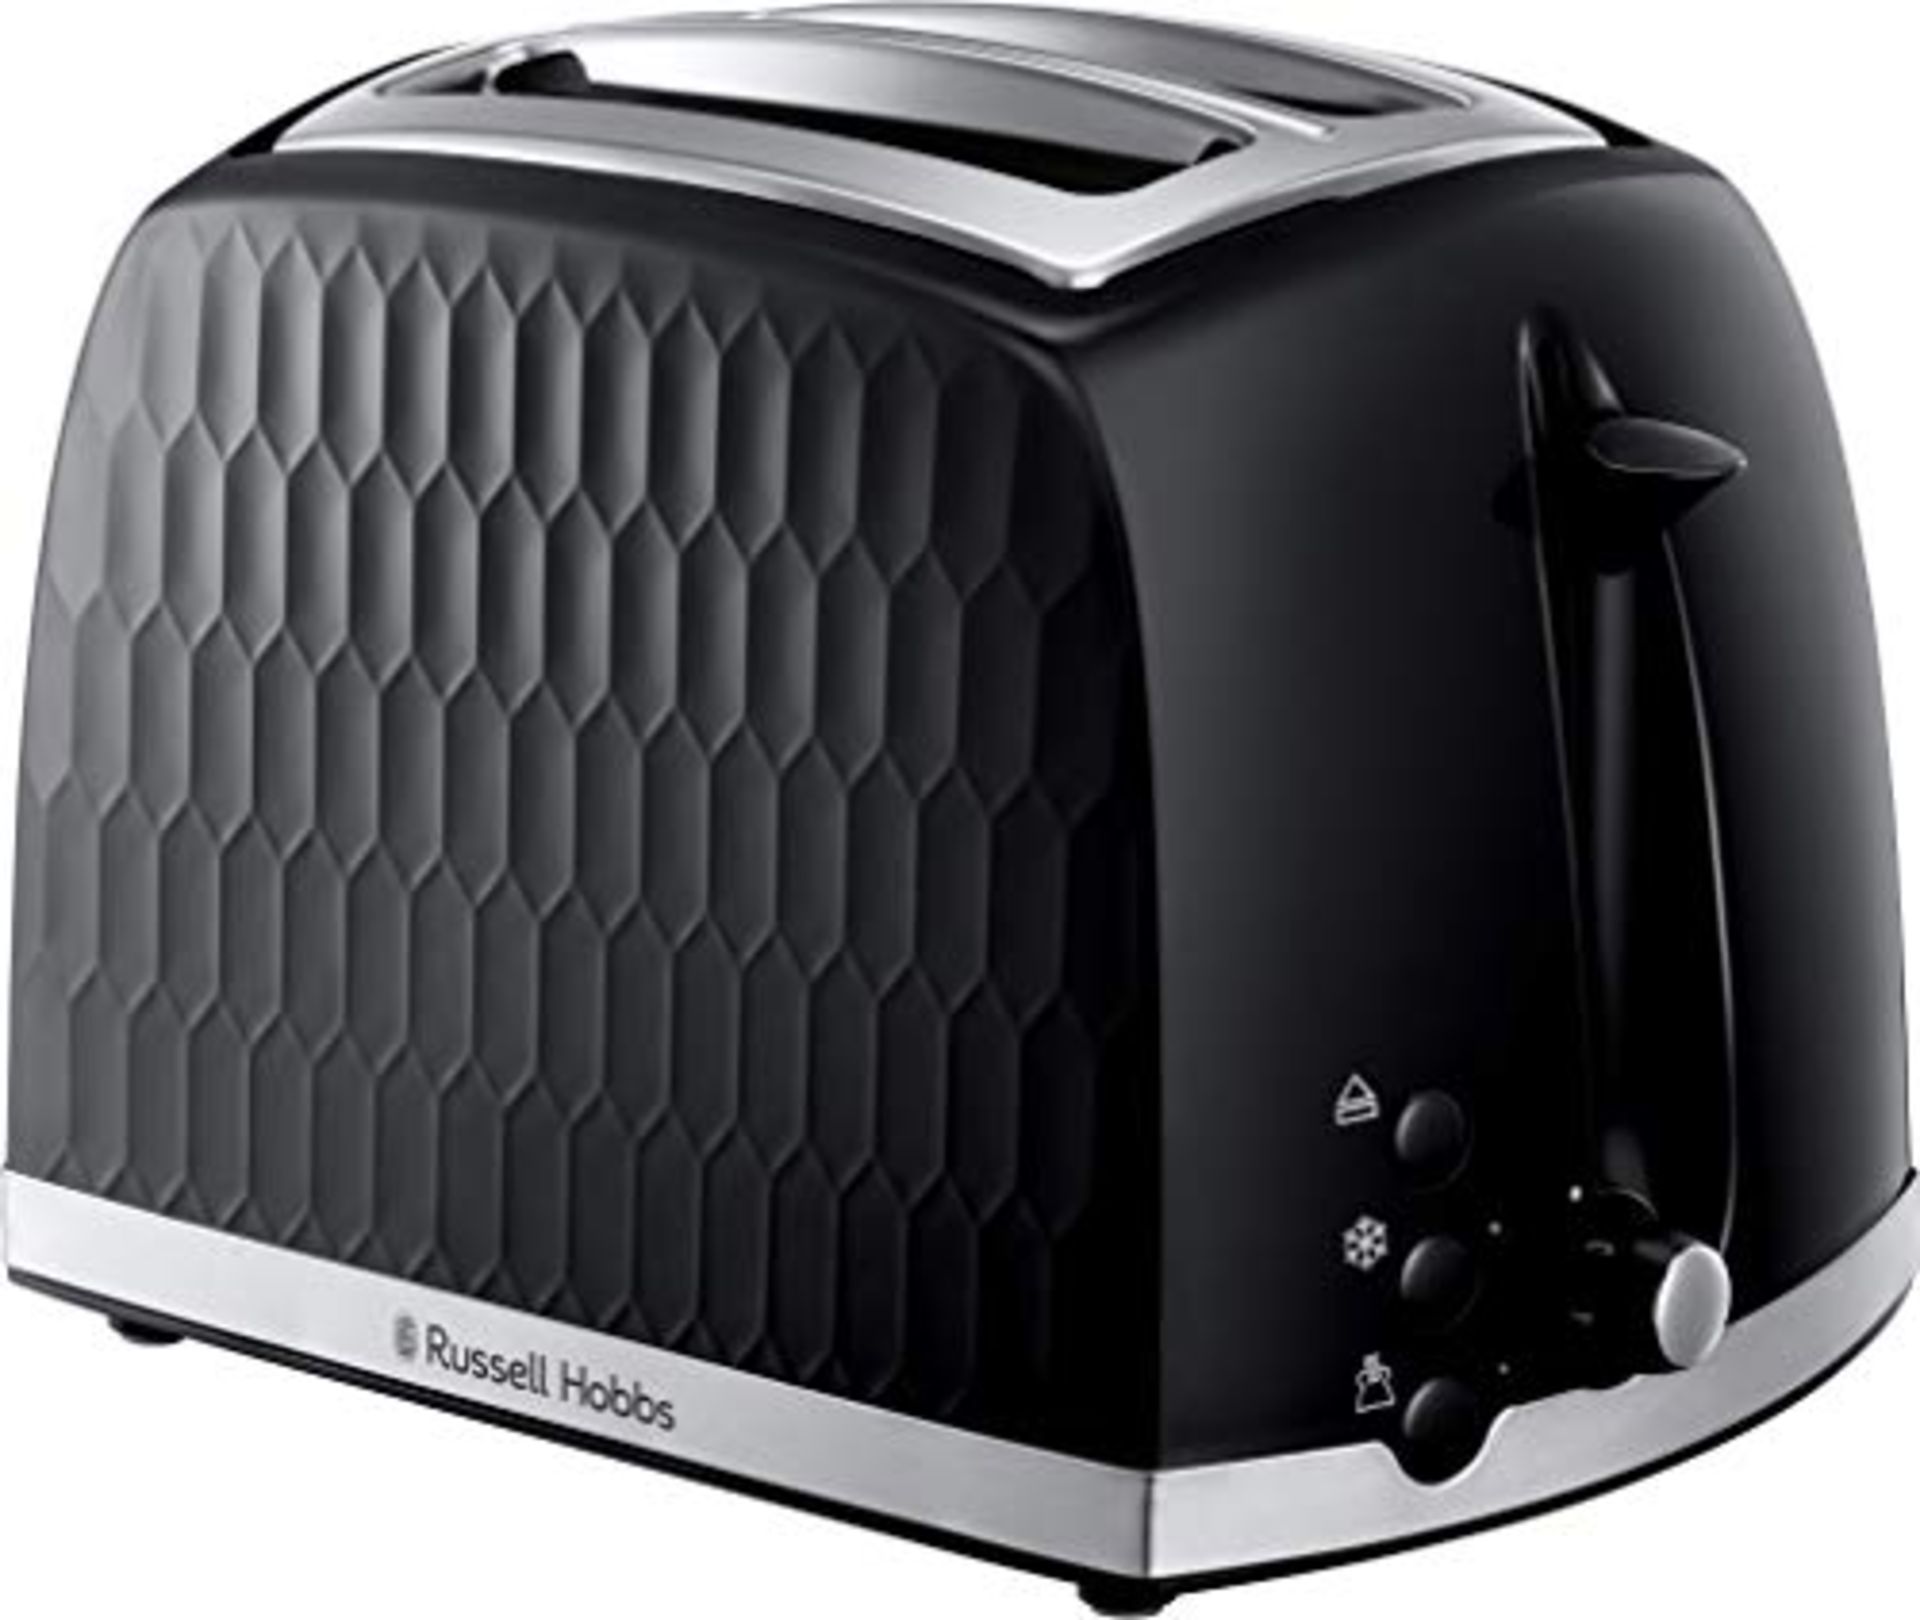 Russell Hobbs 26061 2 Slice Toaster - Contemporary Honeycomb Design with Extra Wide Sl